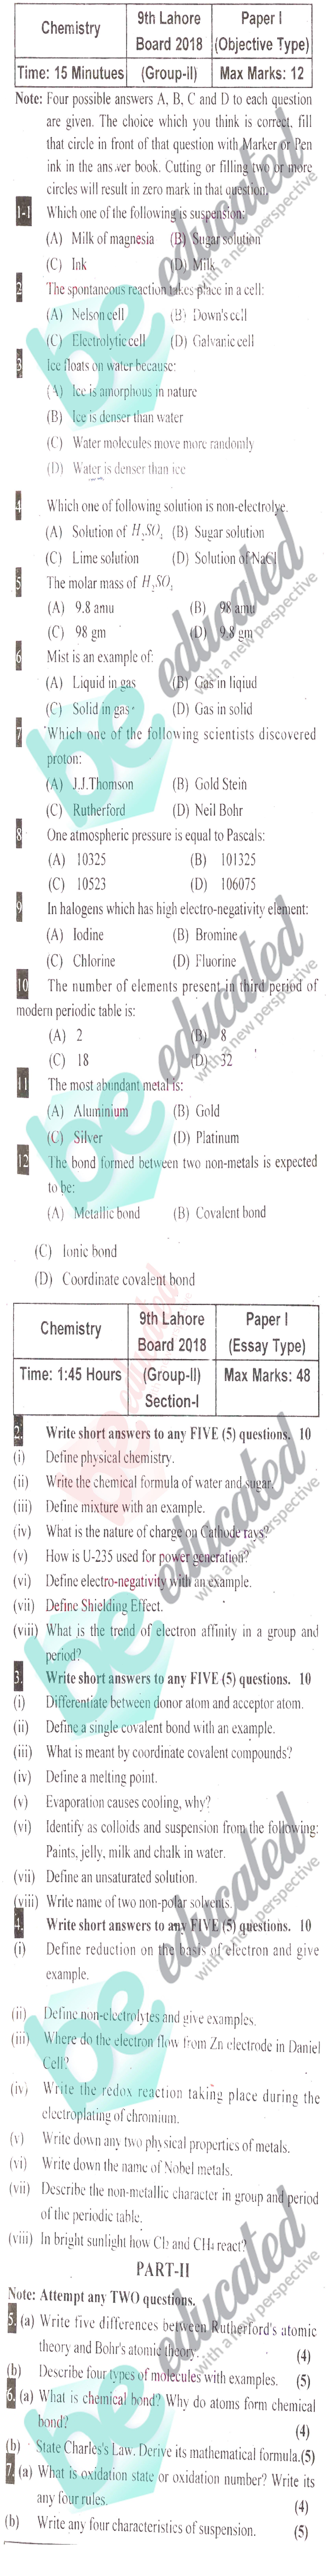 Chemistry 9th Class English Medium Past Paper Group 2 BISE Lahore 2018